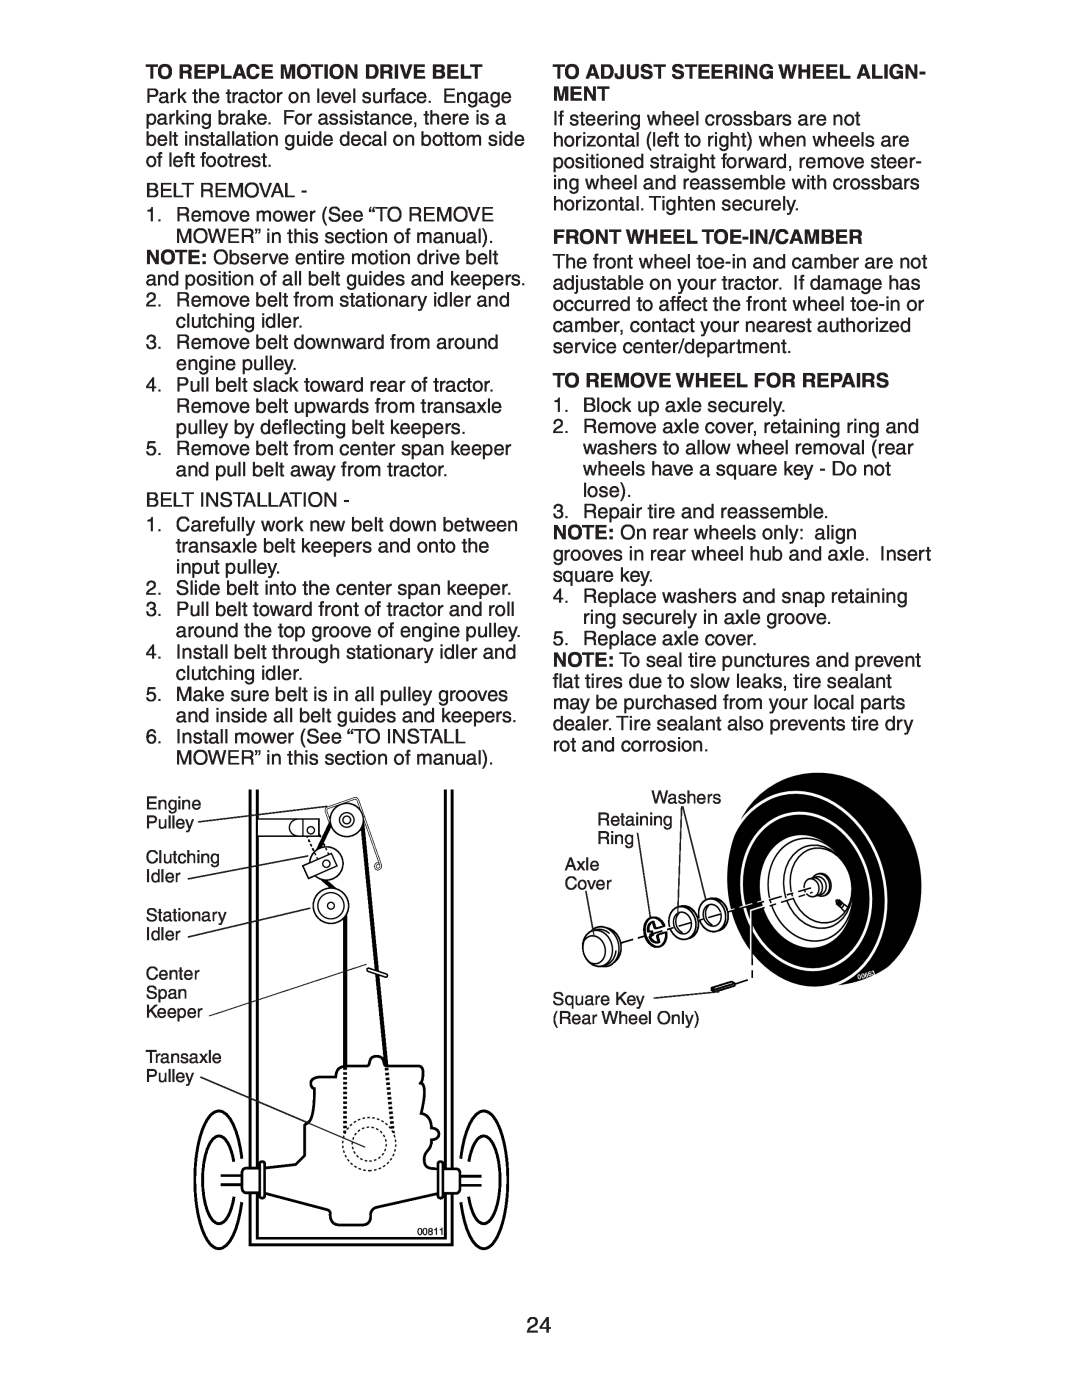 Poulan AG17542STB manual To Replace Motion Drive Belt, To Adjust Steering Wheel Align- Ment, Front Wheel Toe-In/Camber 